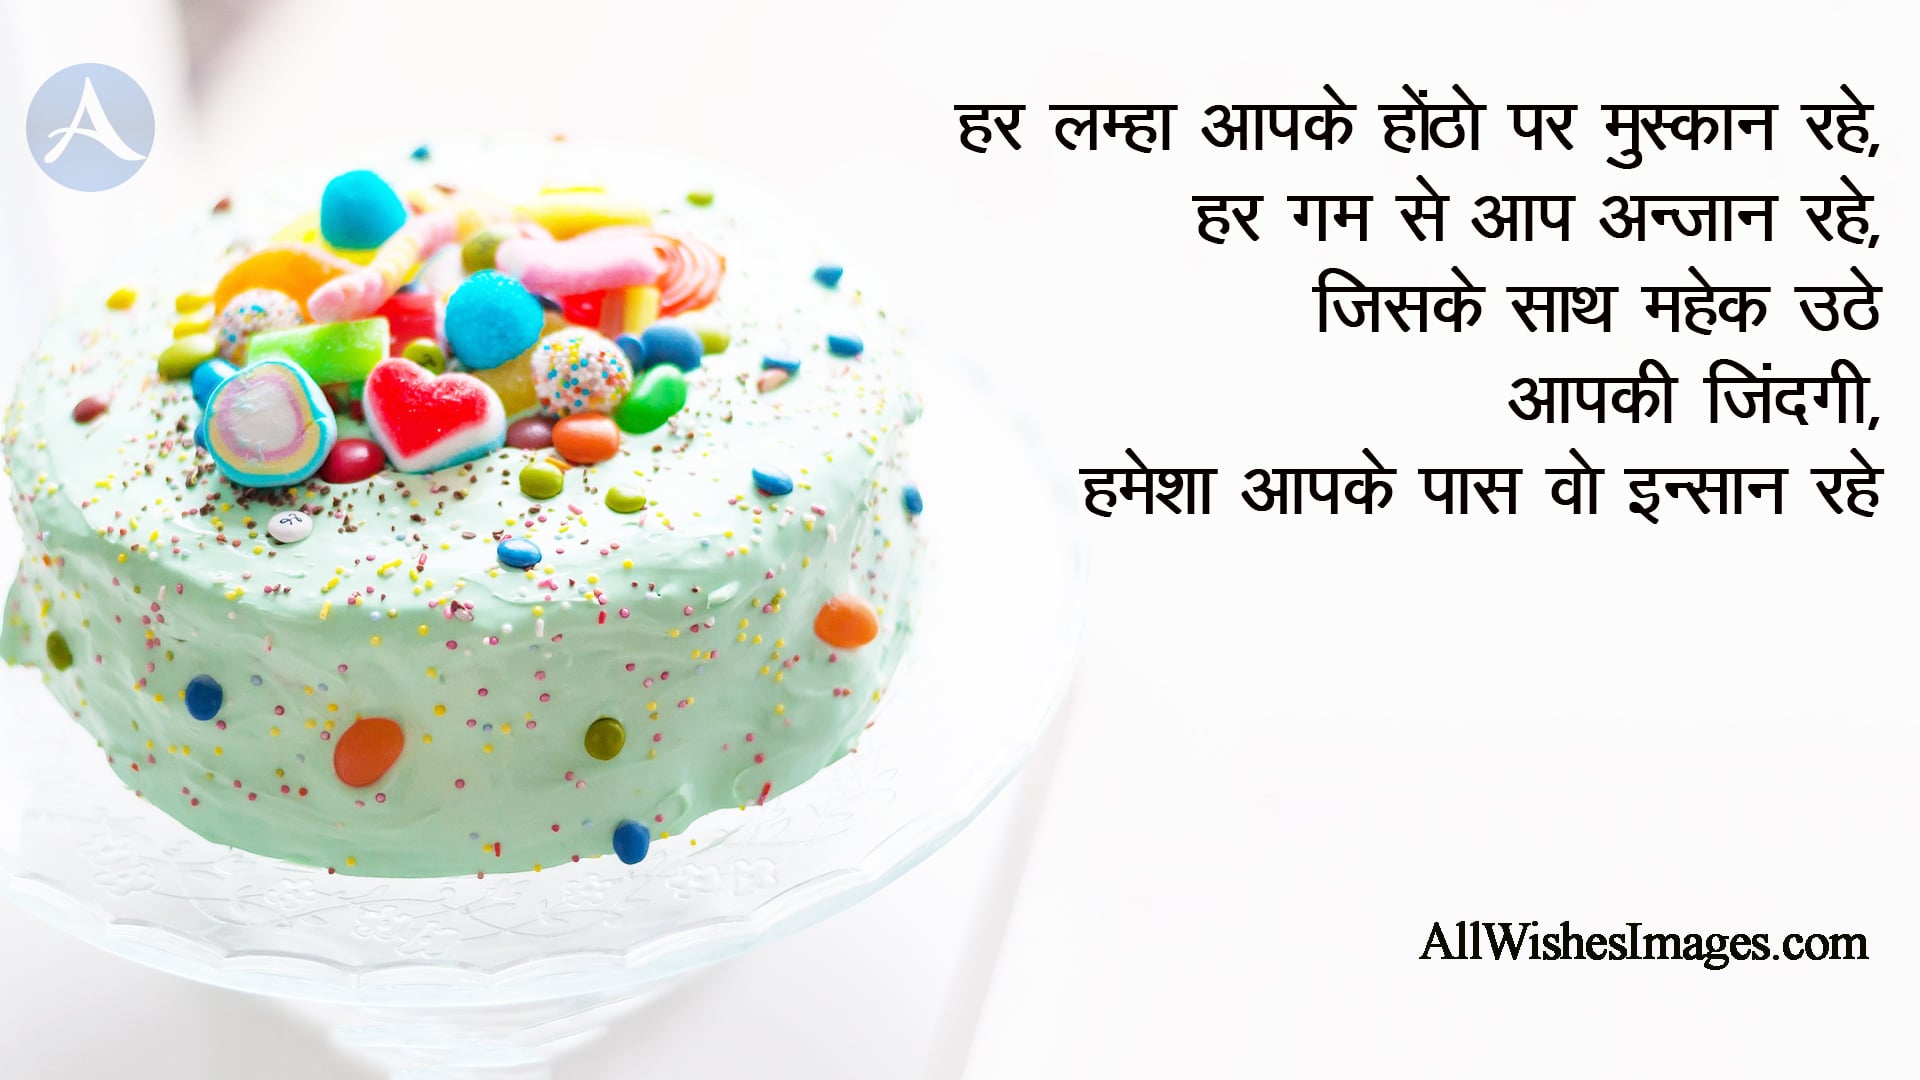 Happy Birthday Hindi Wishes Image - All Wishes Images - Images for WhatsApp